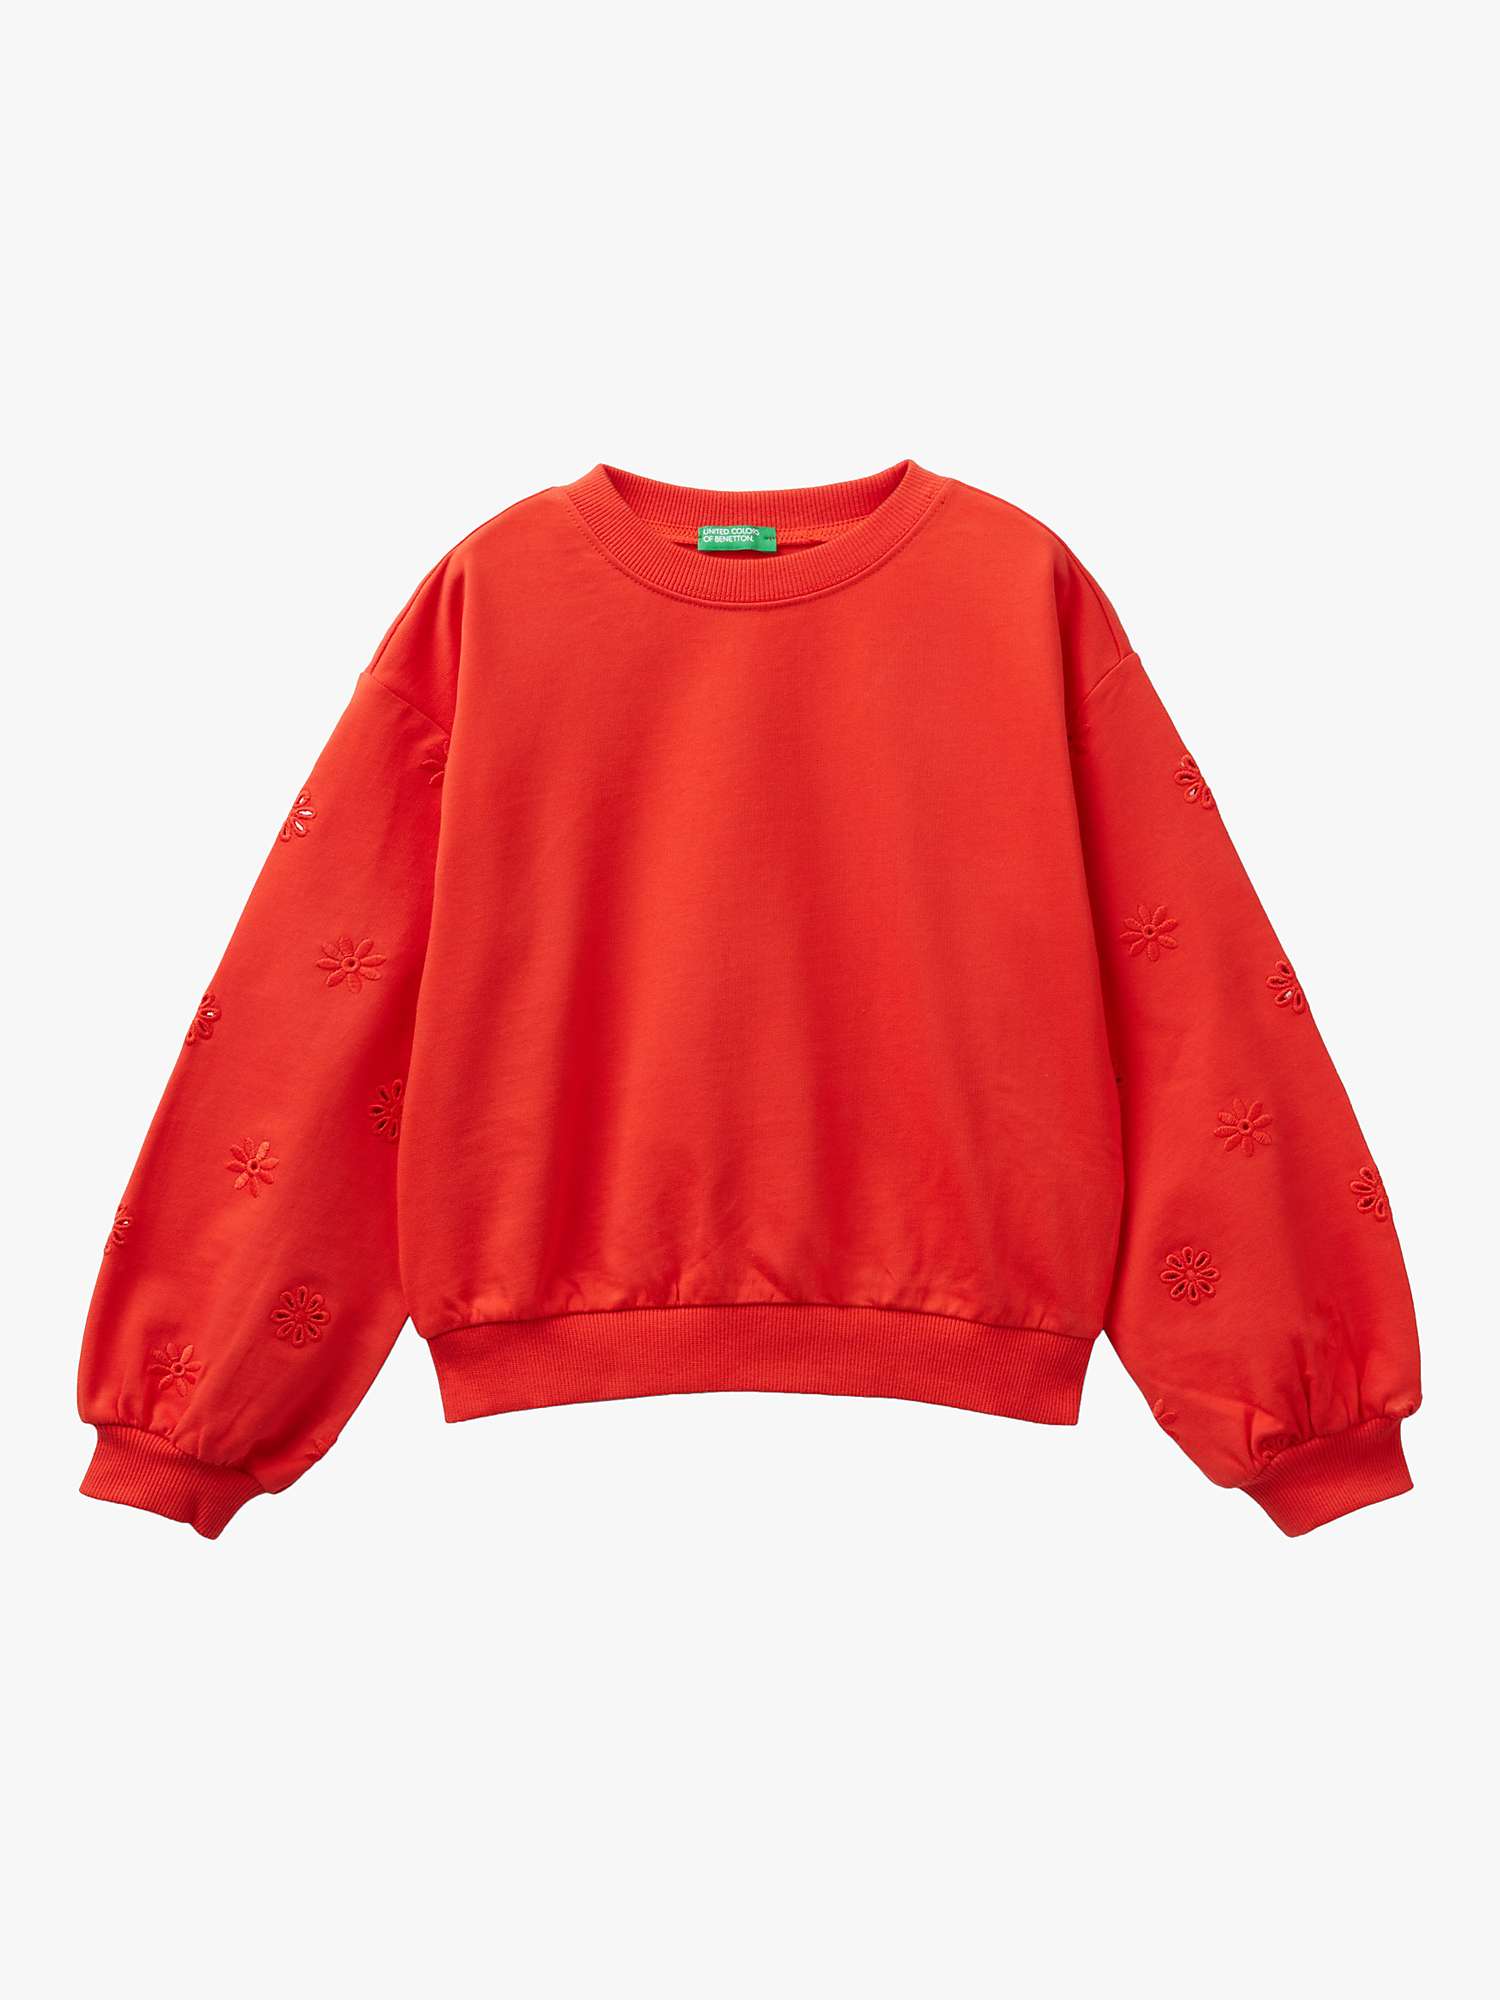 Buy Benetton Kids' Cotton Floral Embroidered Sleeve Crew Neck Sweatshirt, Bright Red Online at johnlewis.com